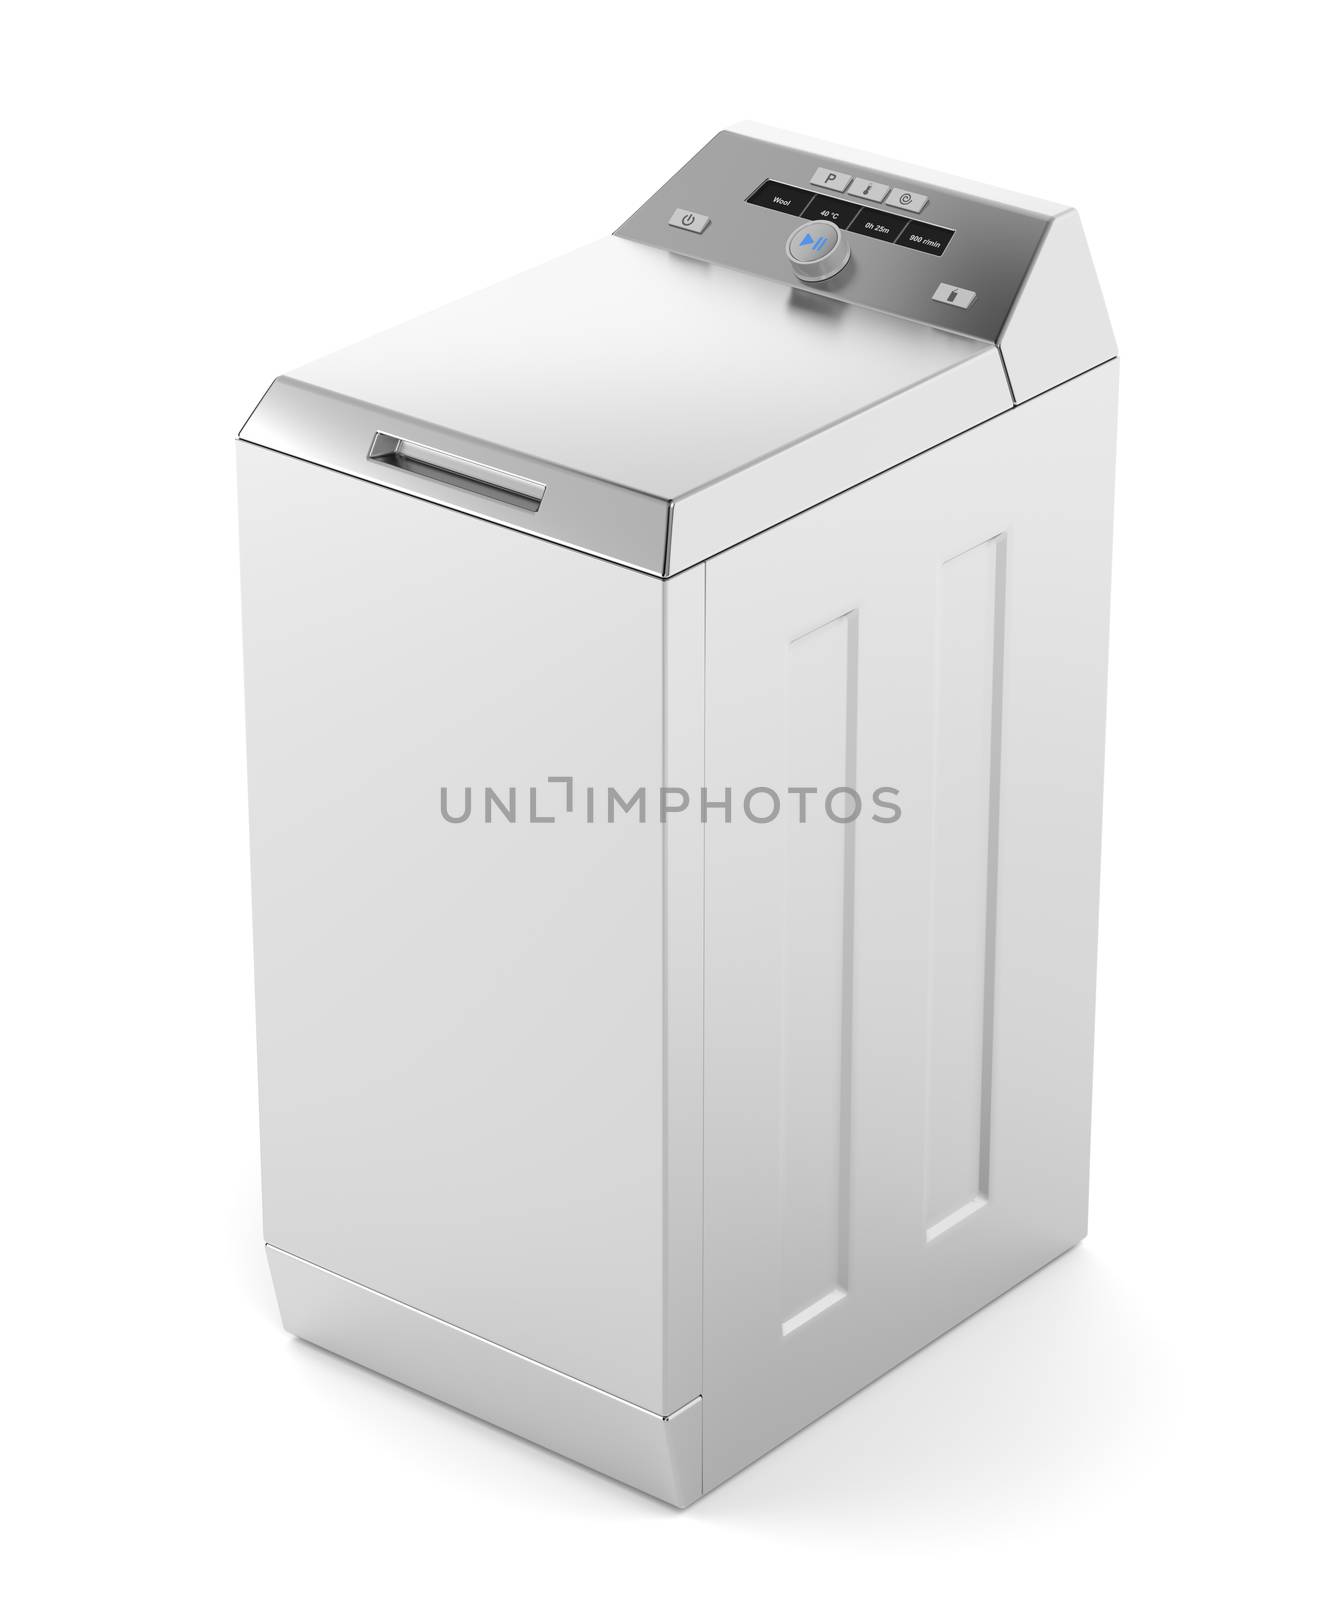 Silver top load washing machine on white background